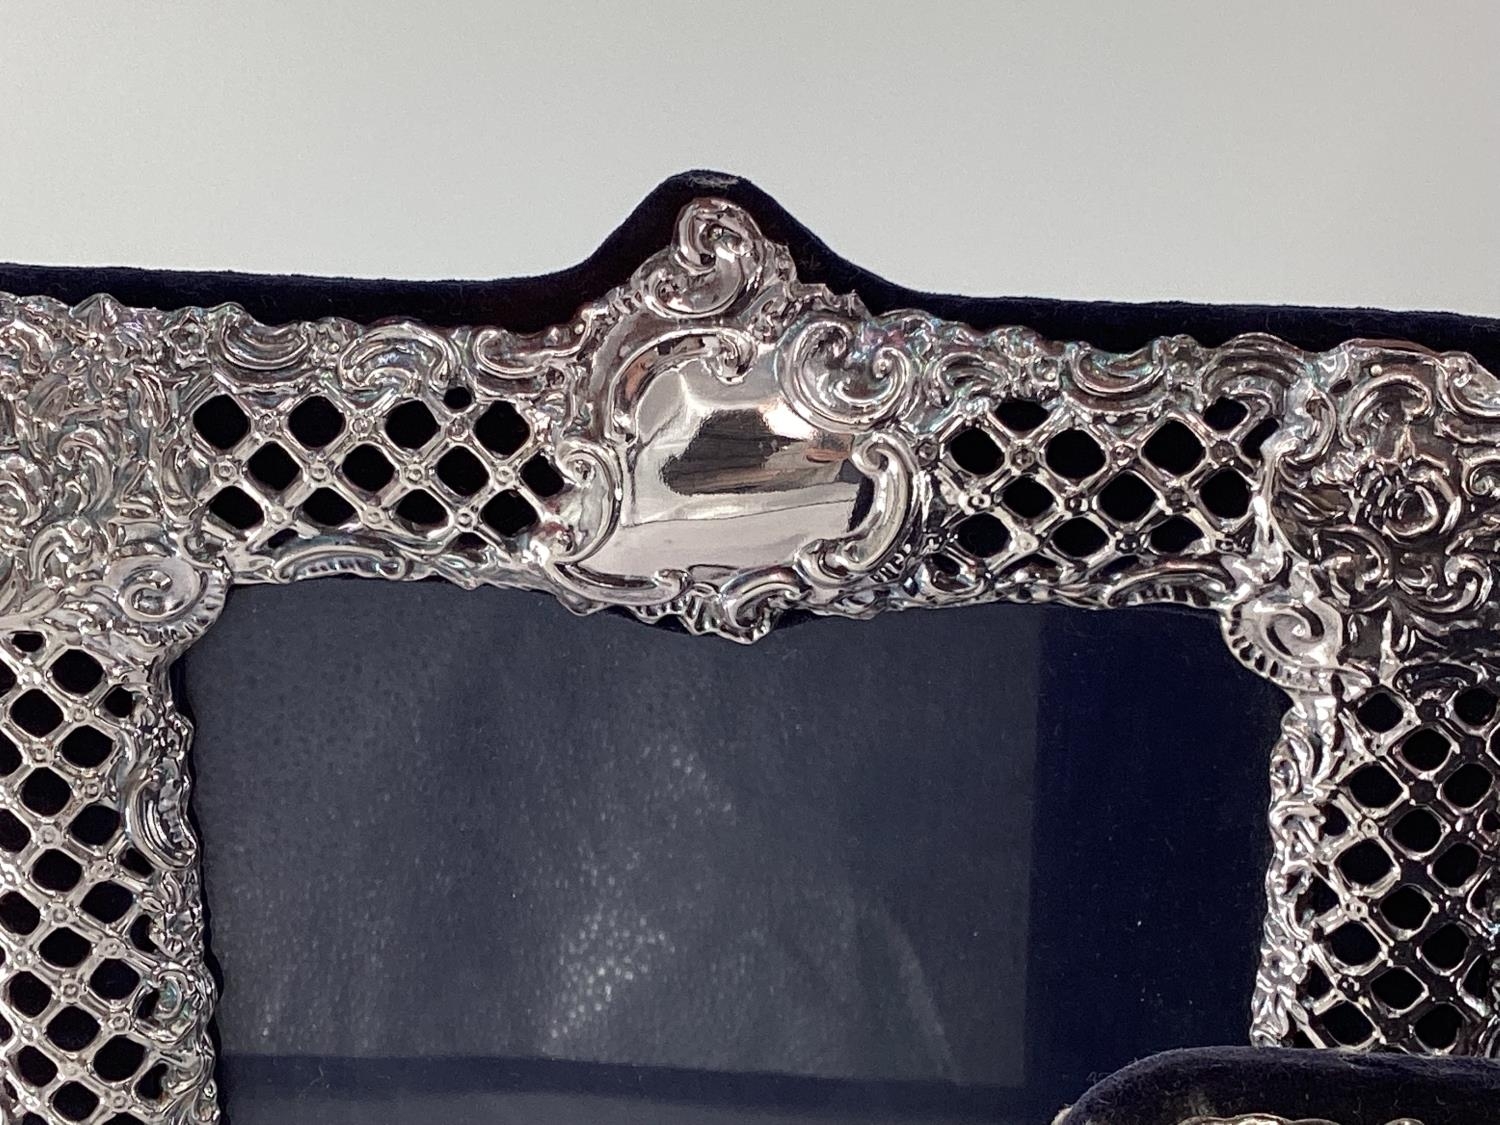 Trio of Sterling silver picture frames with pierced decoration by Keyfold Frames, Ltd, London - Image 6 of 10